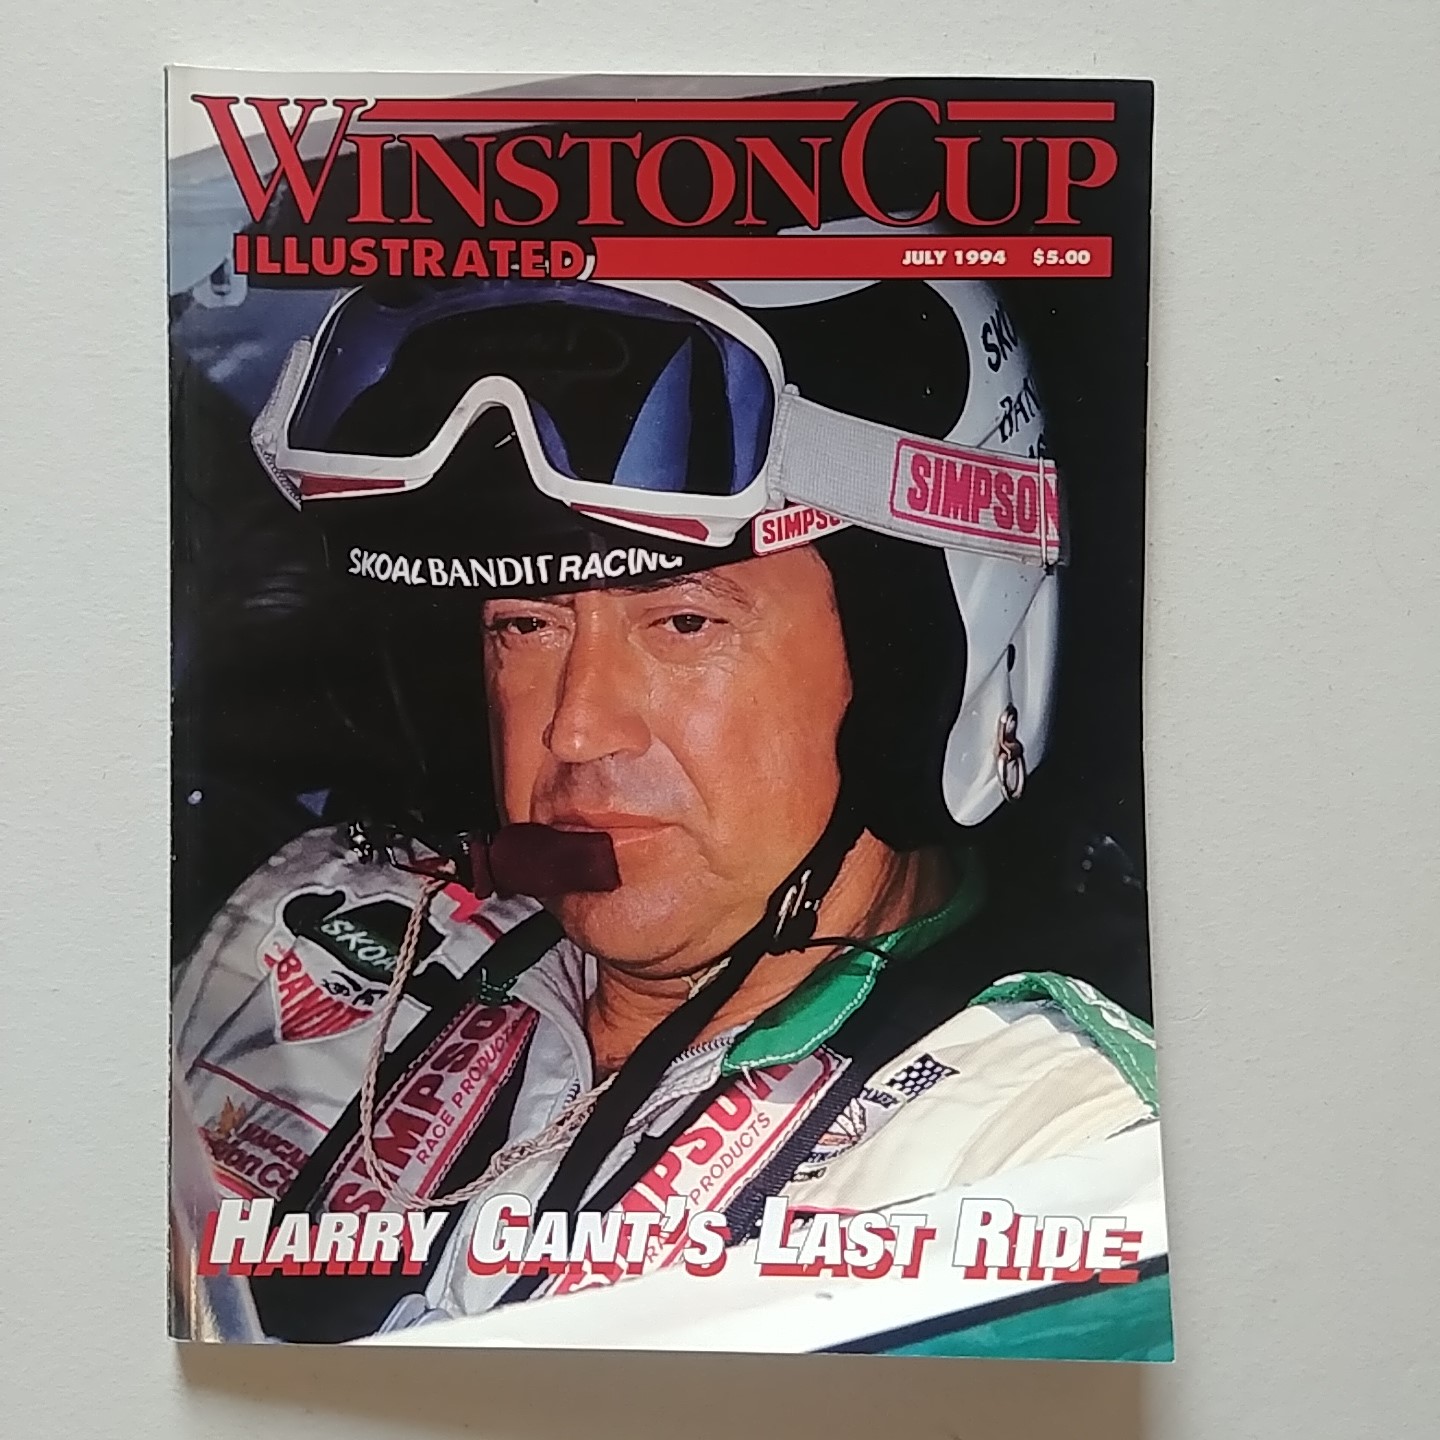 1994 Winston Cup Illustrated July